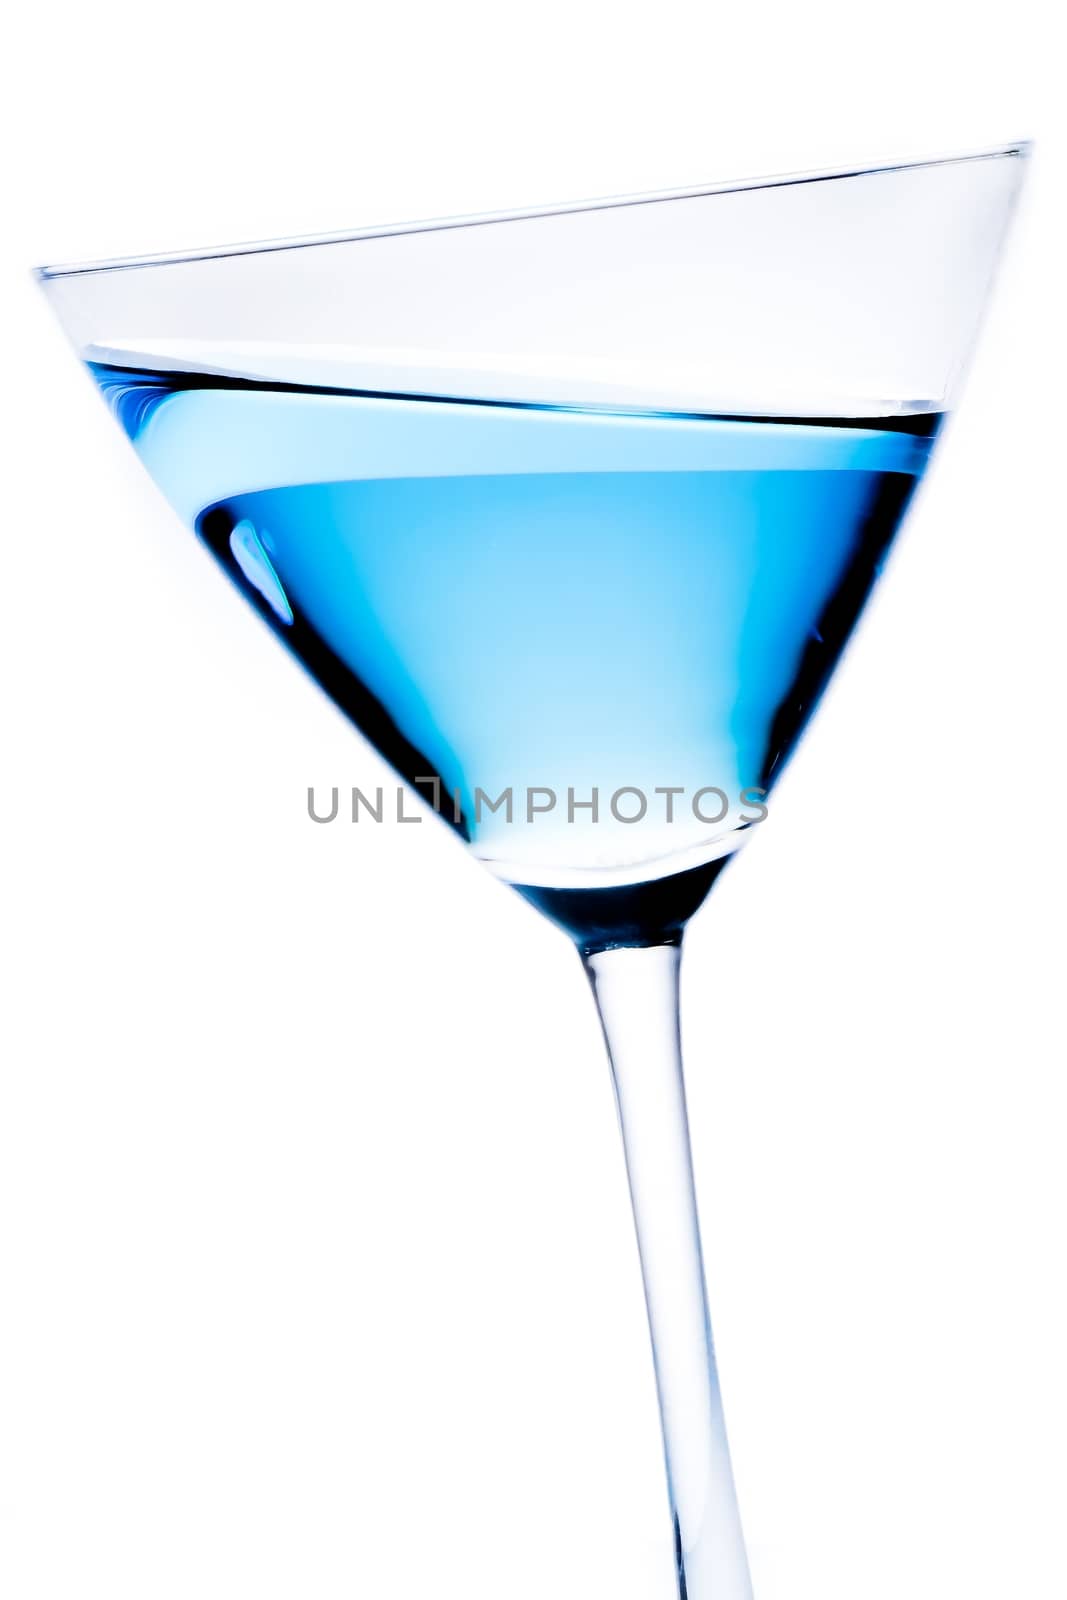 detail of blue cocktail tilted on a white background